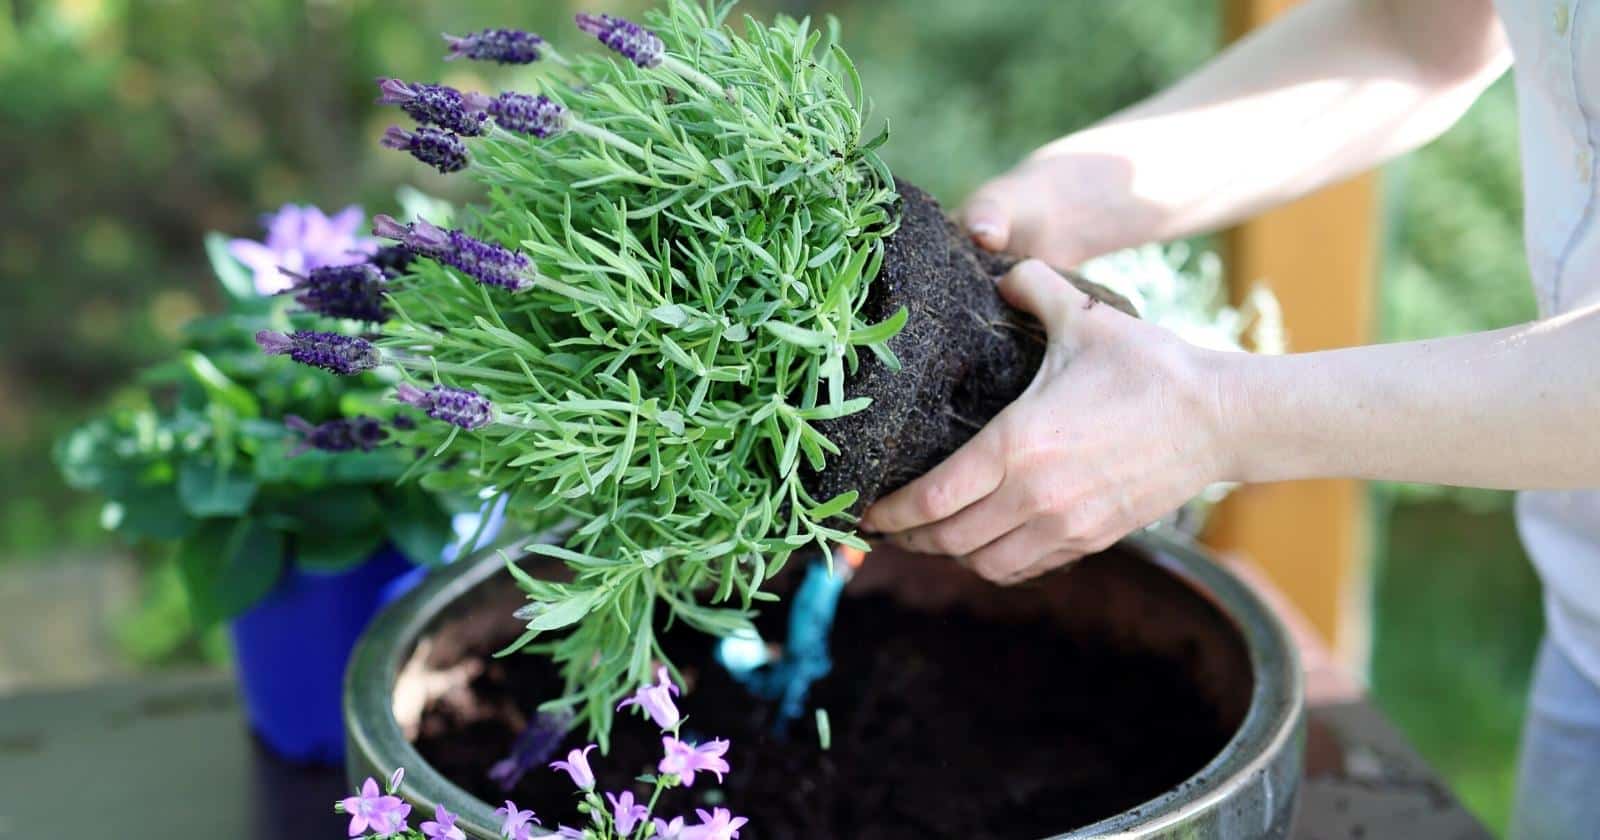 Small green plant with tiny purple flowers, being planted in a large green pot.